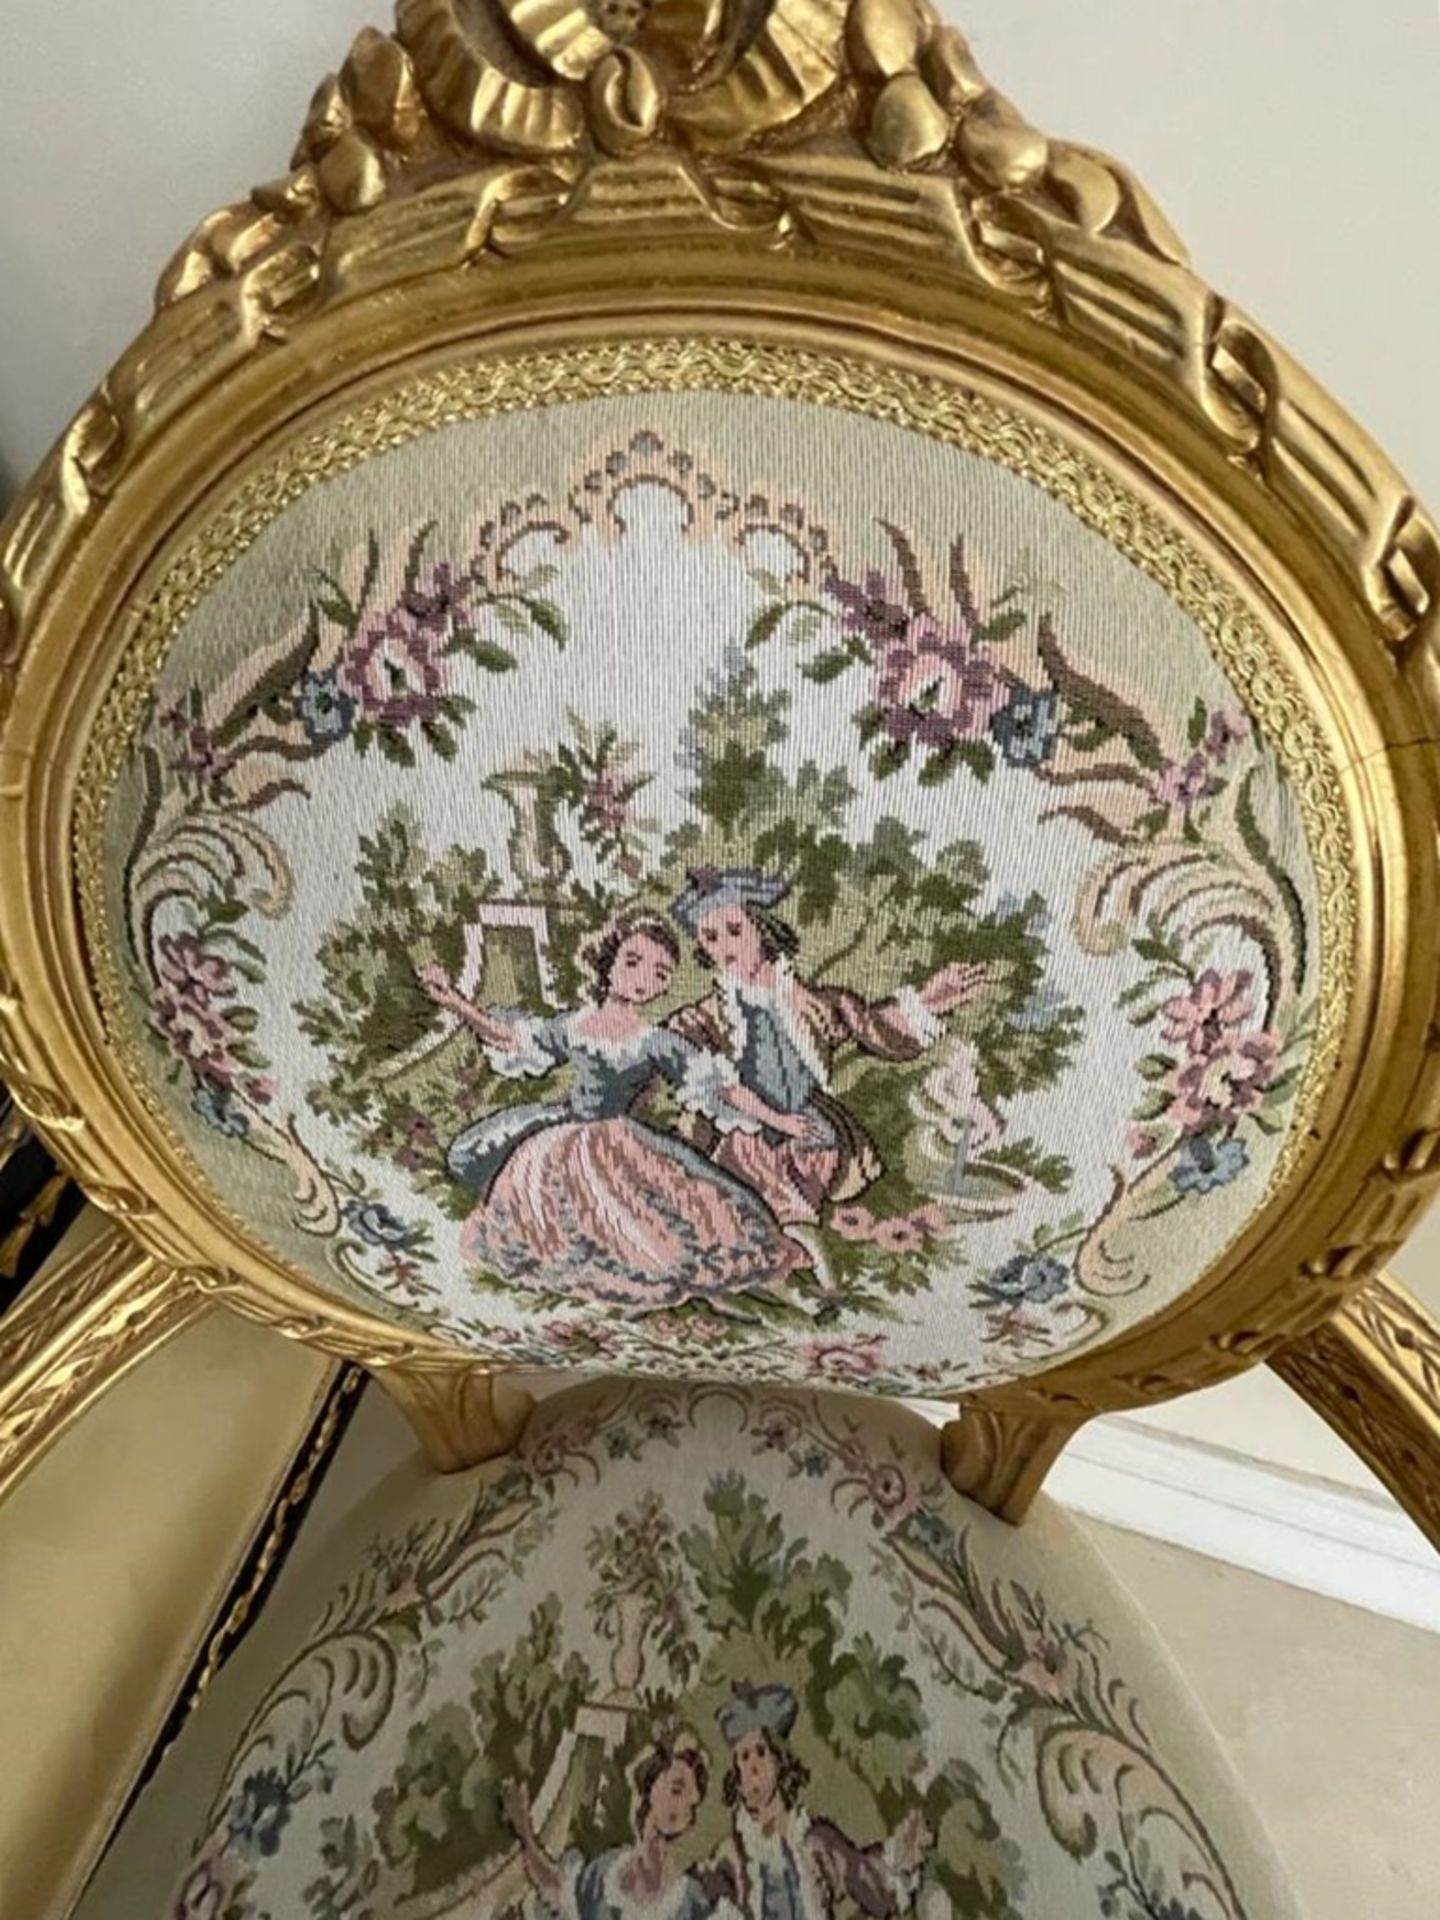 1 x Louis XVI French Style Three-Piece Salon Suite With Tapestry Upholstery and Carved Gold - Image 22 of 37